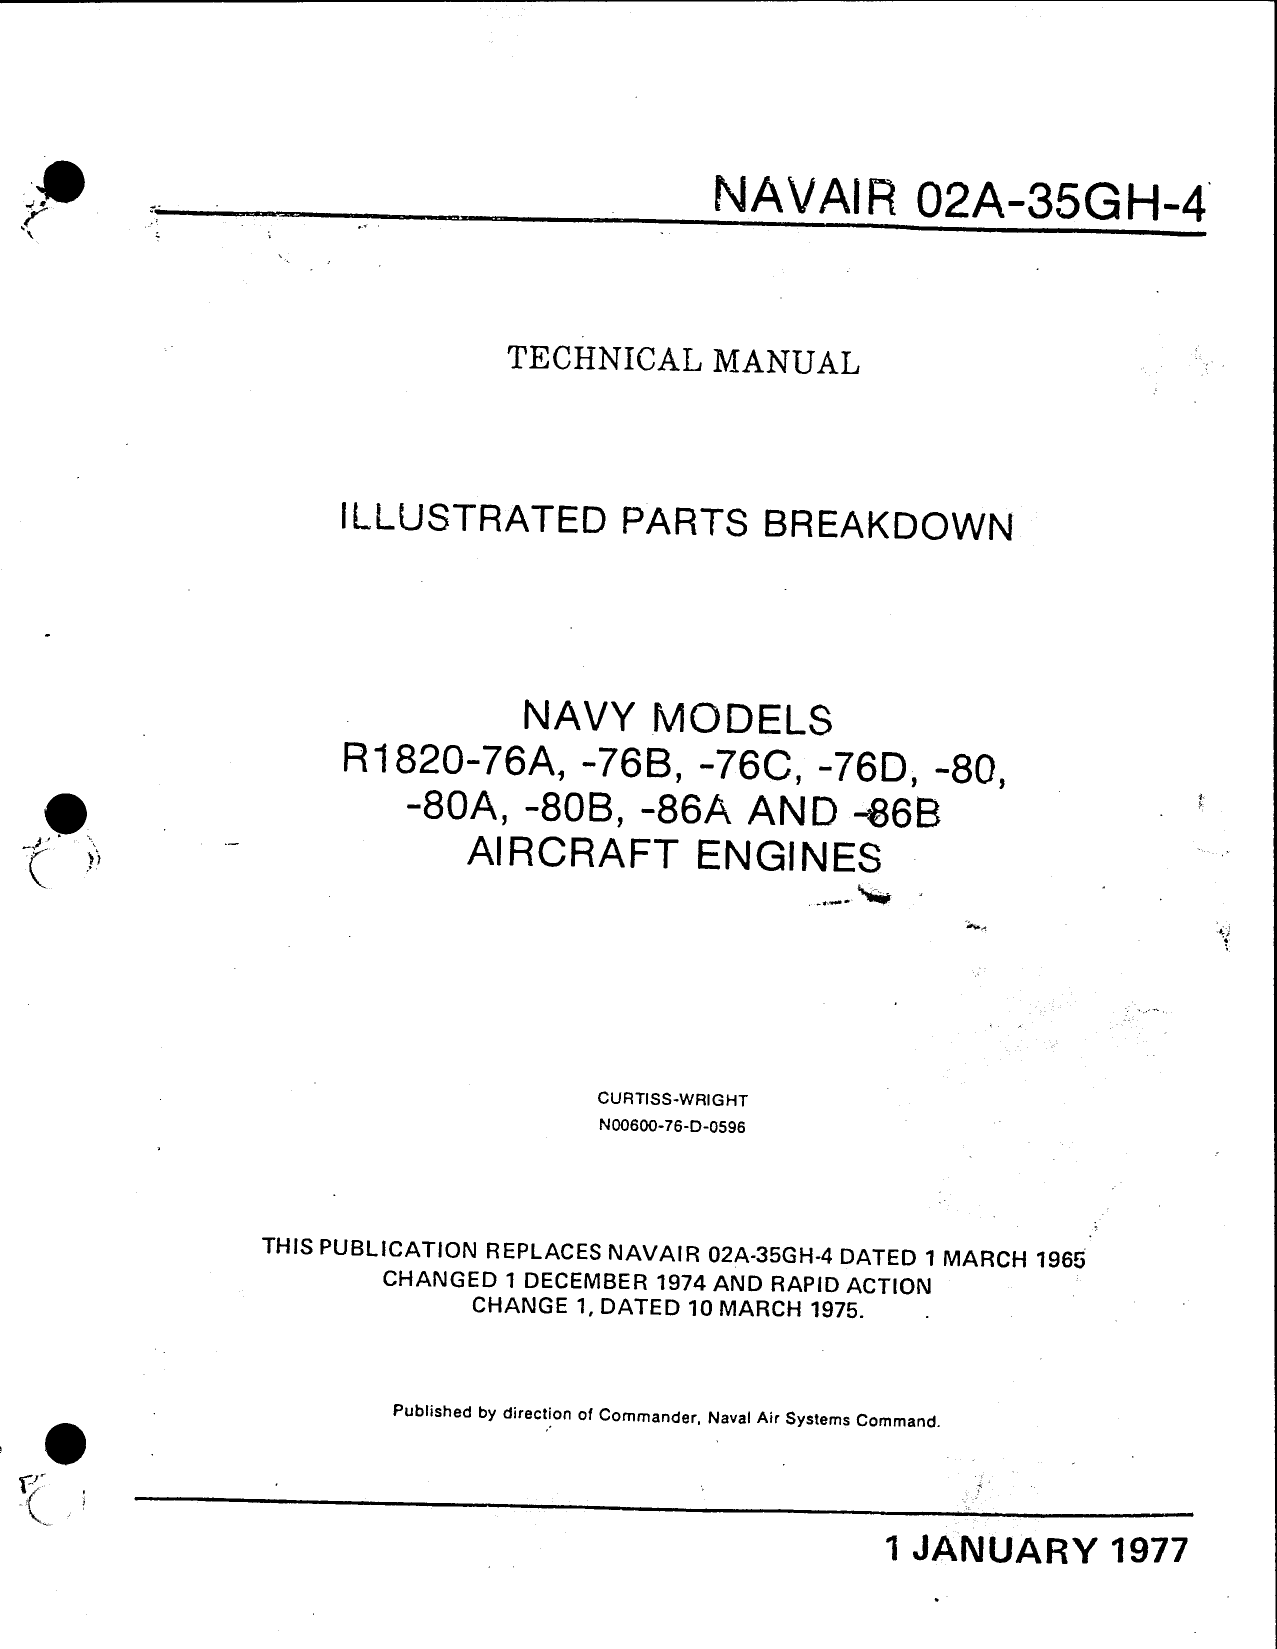 Sample page 1 from AirCorps Library document: Illustrated Parts Breakdown for R-1820 Aircraft Engines